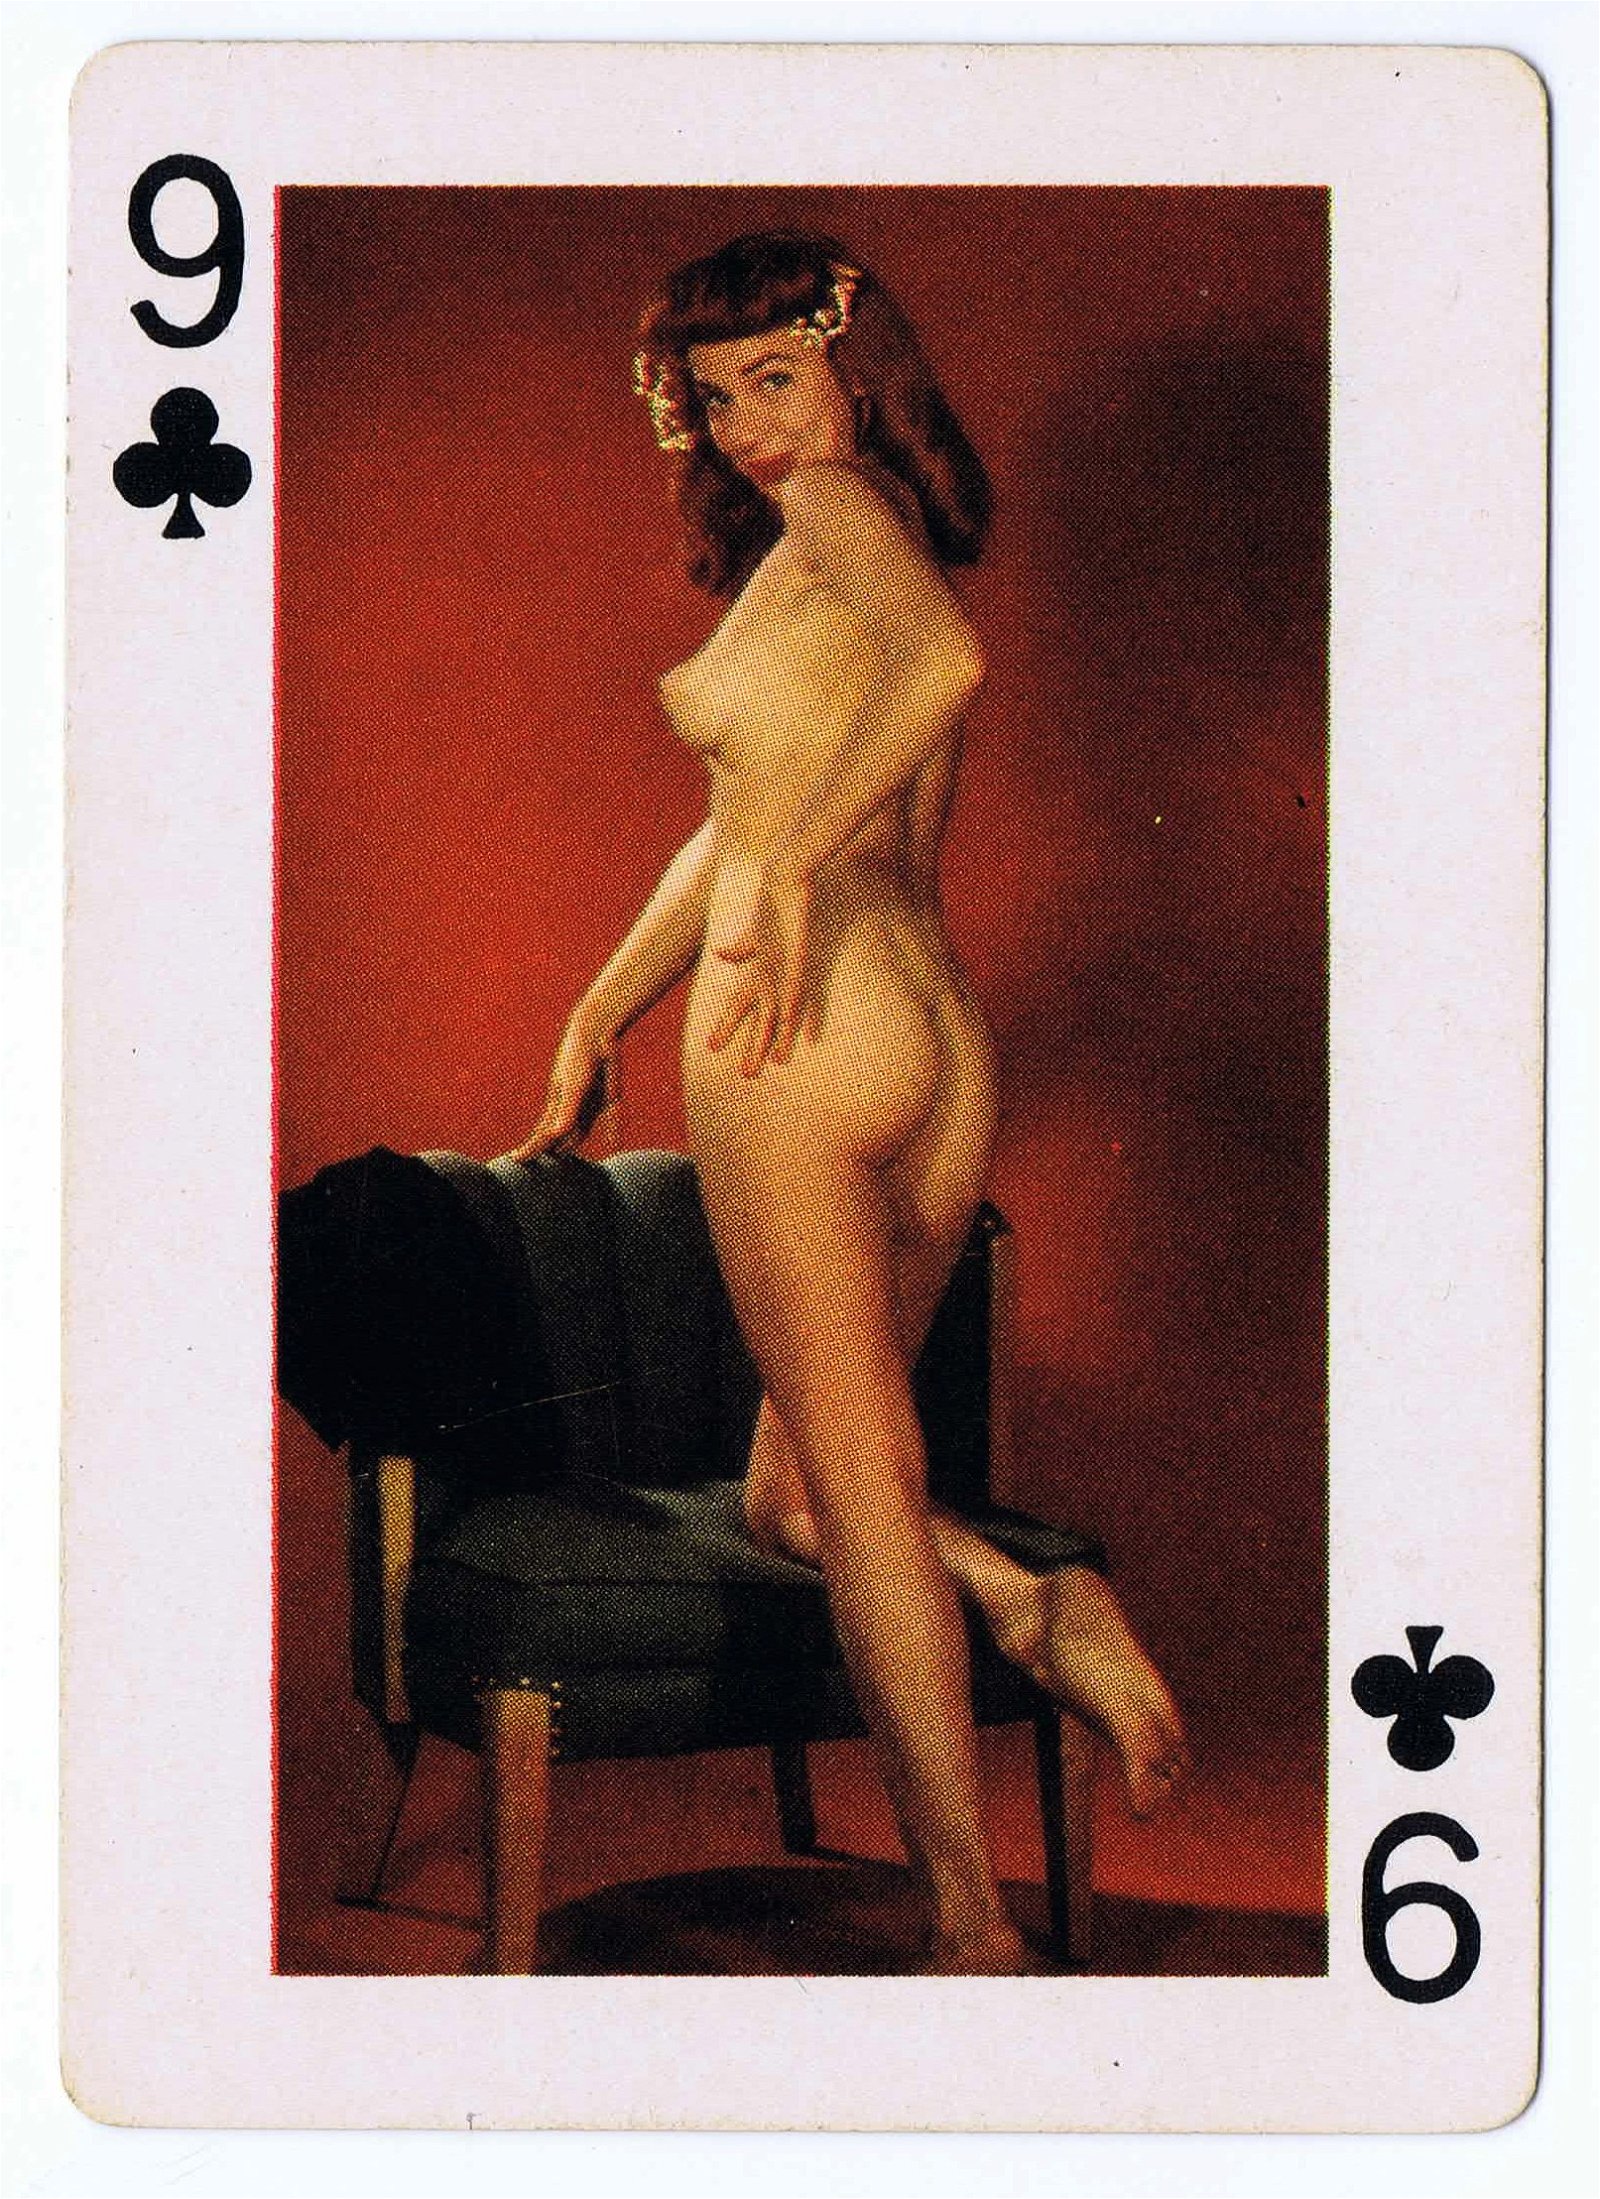 Photo by CRD Larson Art with the username @CRDLarson, who is a verified user,  September 10, 2019 at 11:46 AM. The post is about the topic Nude Playing Cards and the text says 'Nine of Clubs

From deck titled 'Fifty-Two Art Studies.' Made by the Novelties Manufacturing and Sales Corp, St. Louis, MO. Mid 1950s.

#photography #vintagenude #vintageerotica #1950s #retro #pinup #boudoir #burlesque #playingcards #glamour #stlouis..'